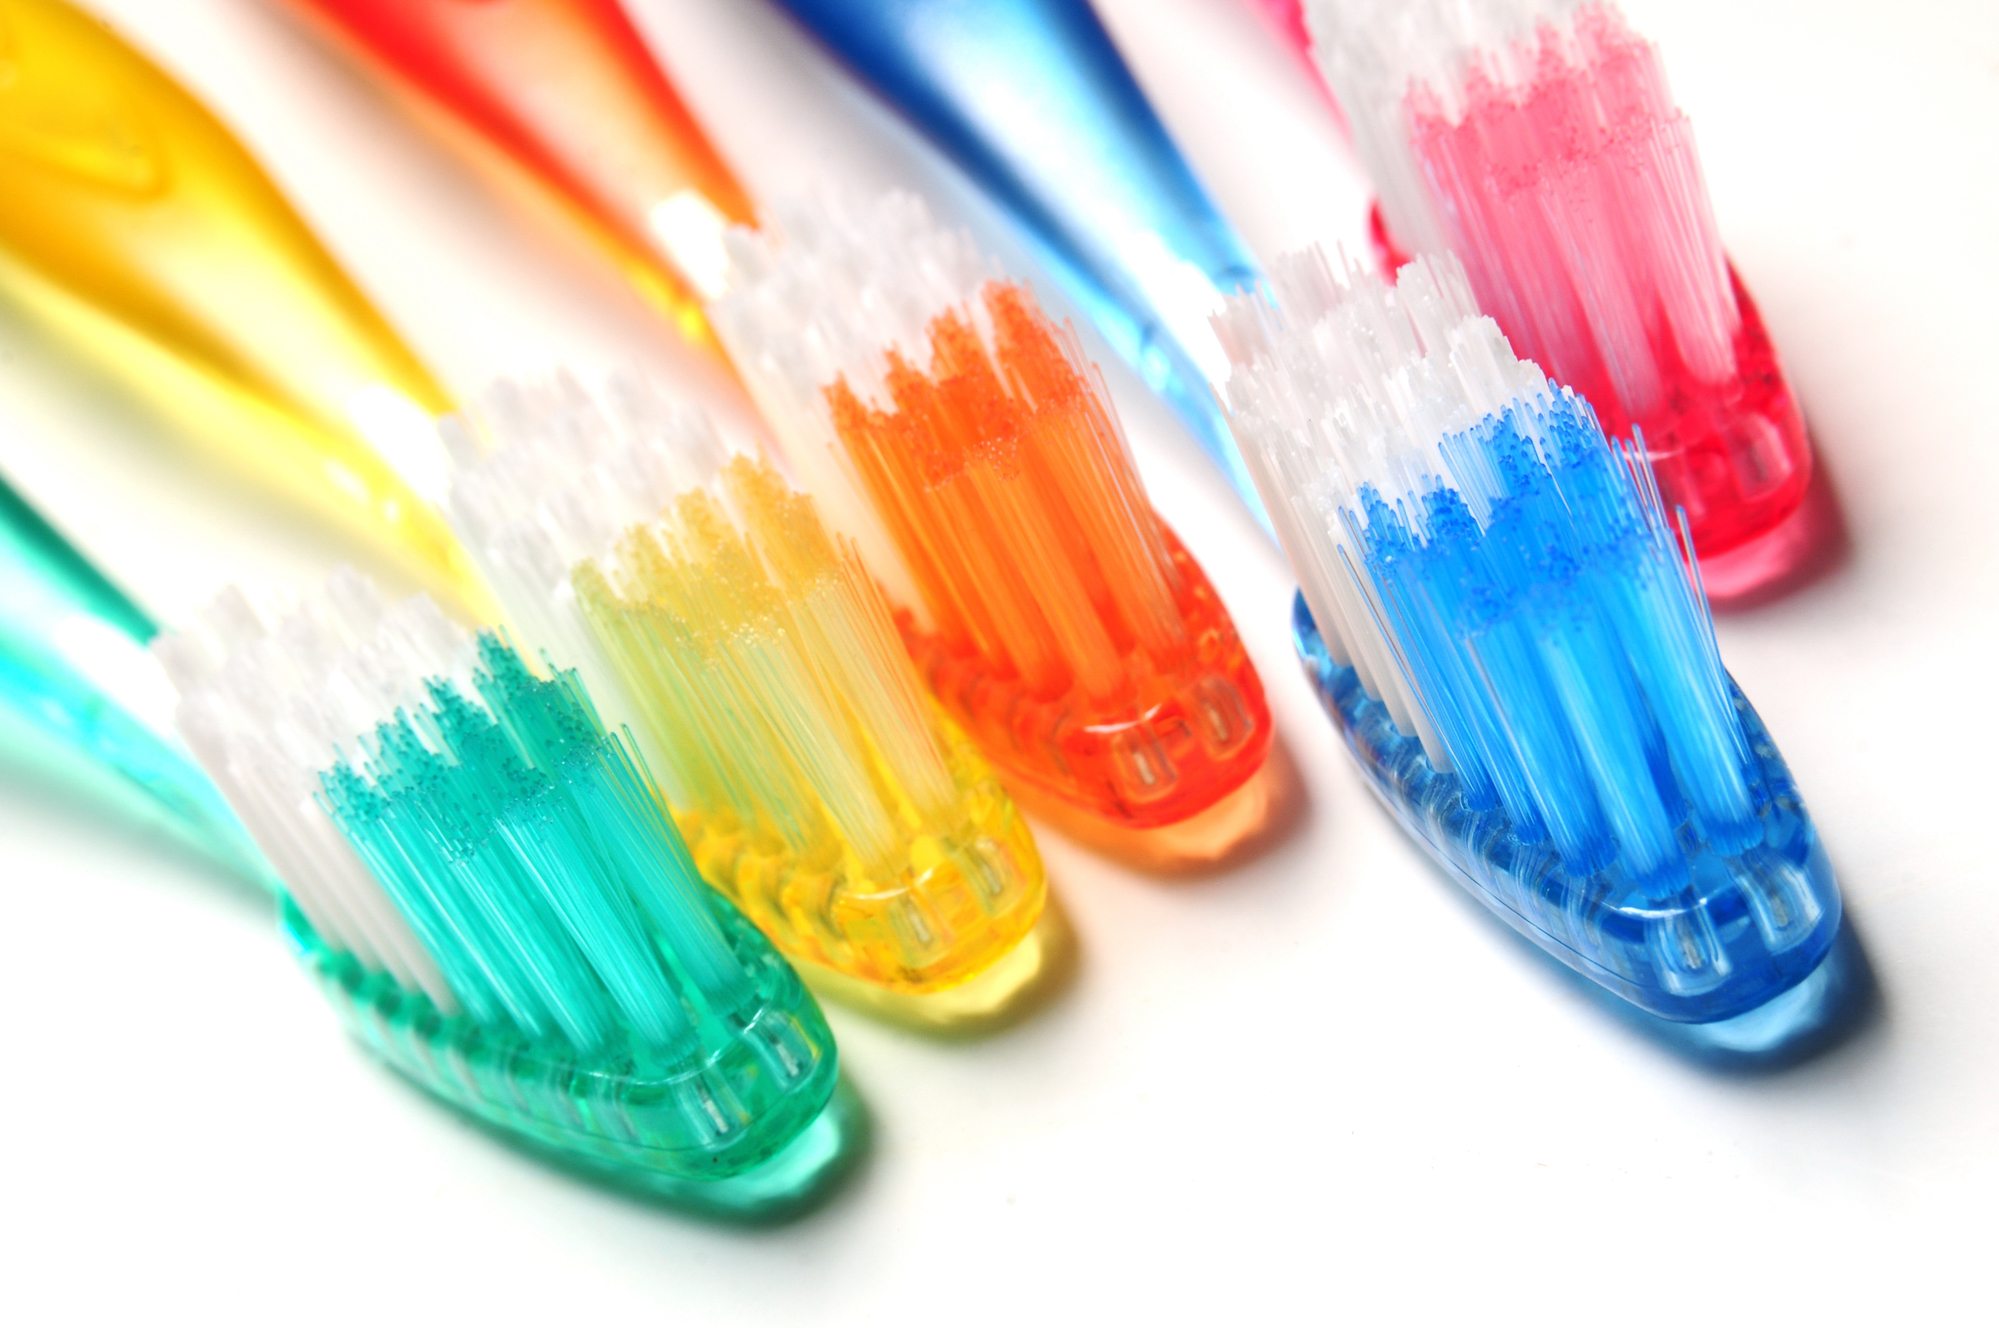 What Kind of Toothbrush is Best?